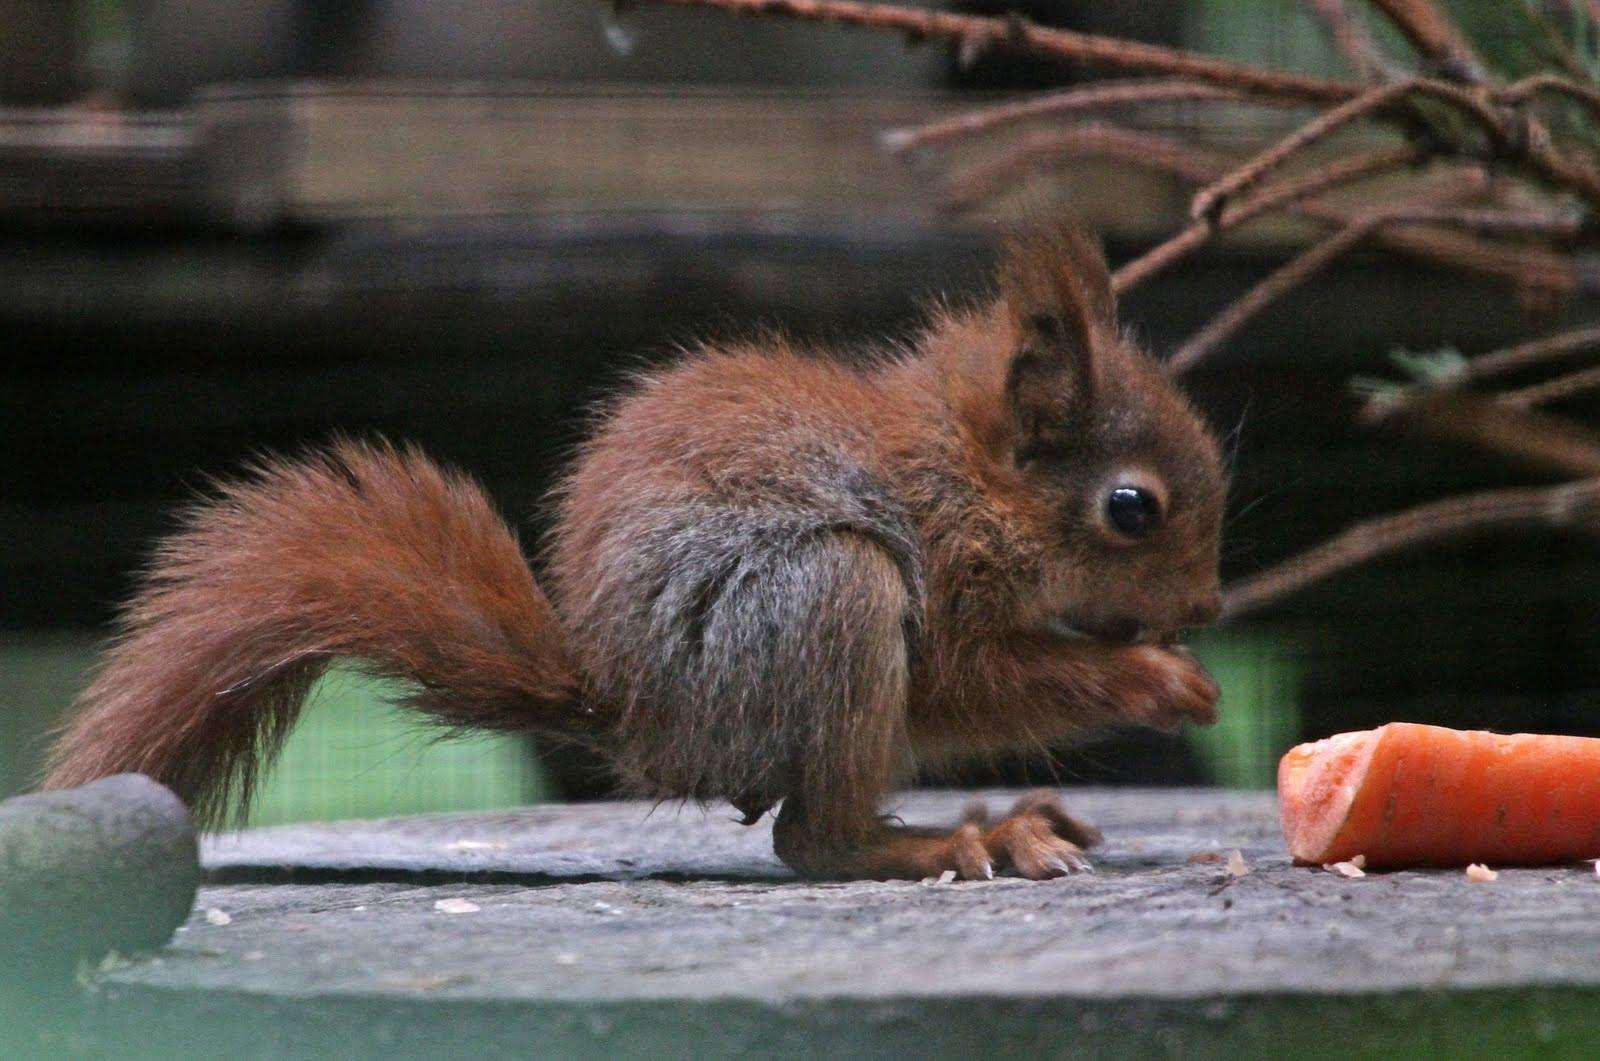 One of the baby squirrels munching on his food